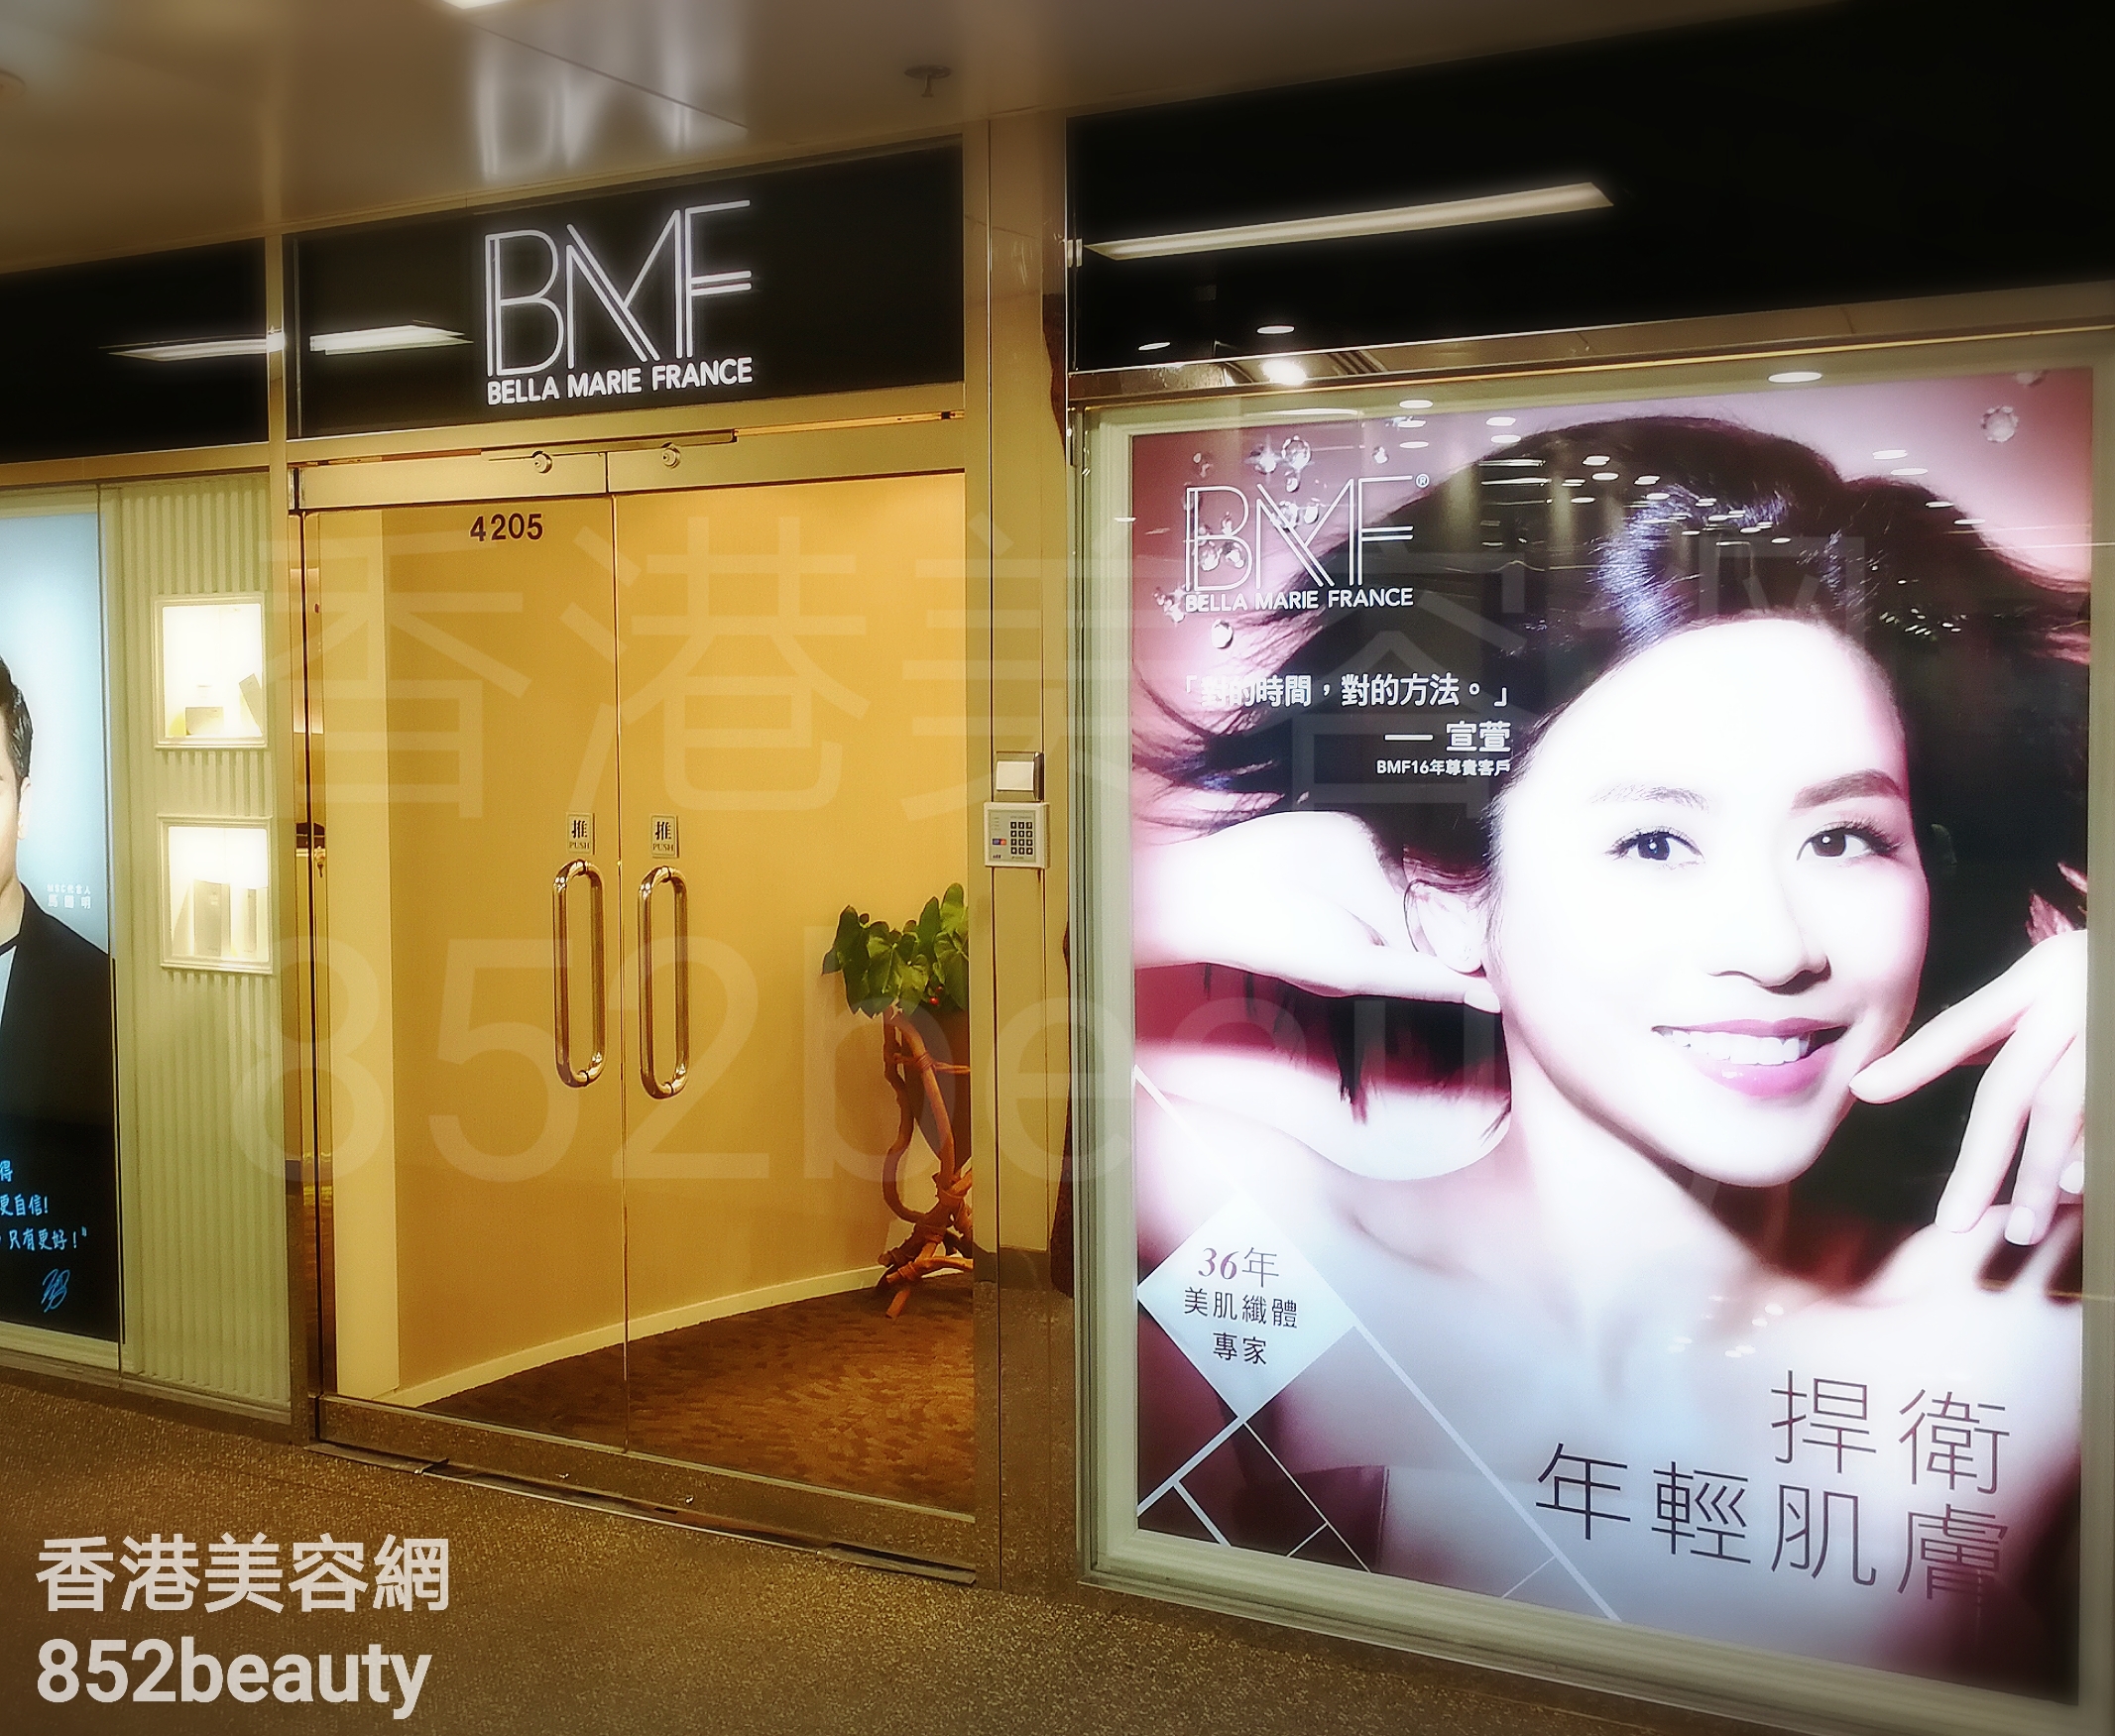 Hair Removal: BMF (葵芳店)